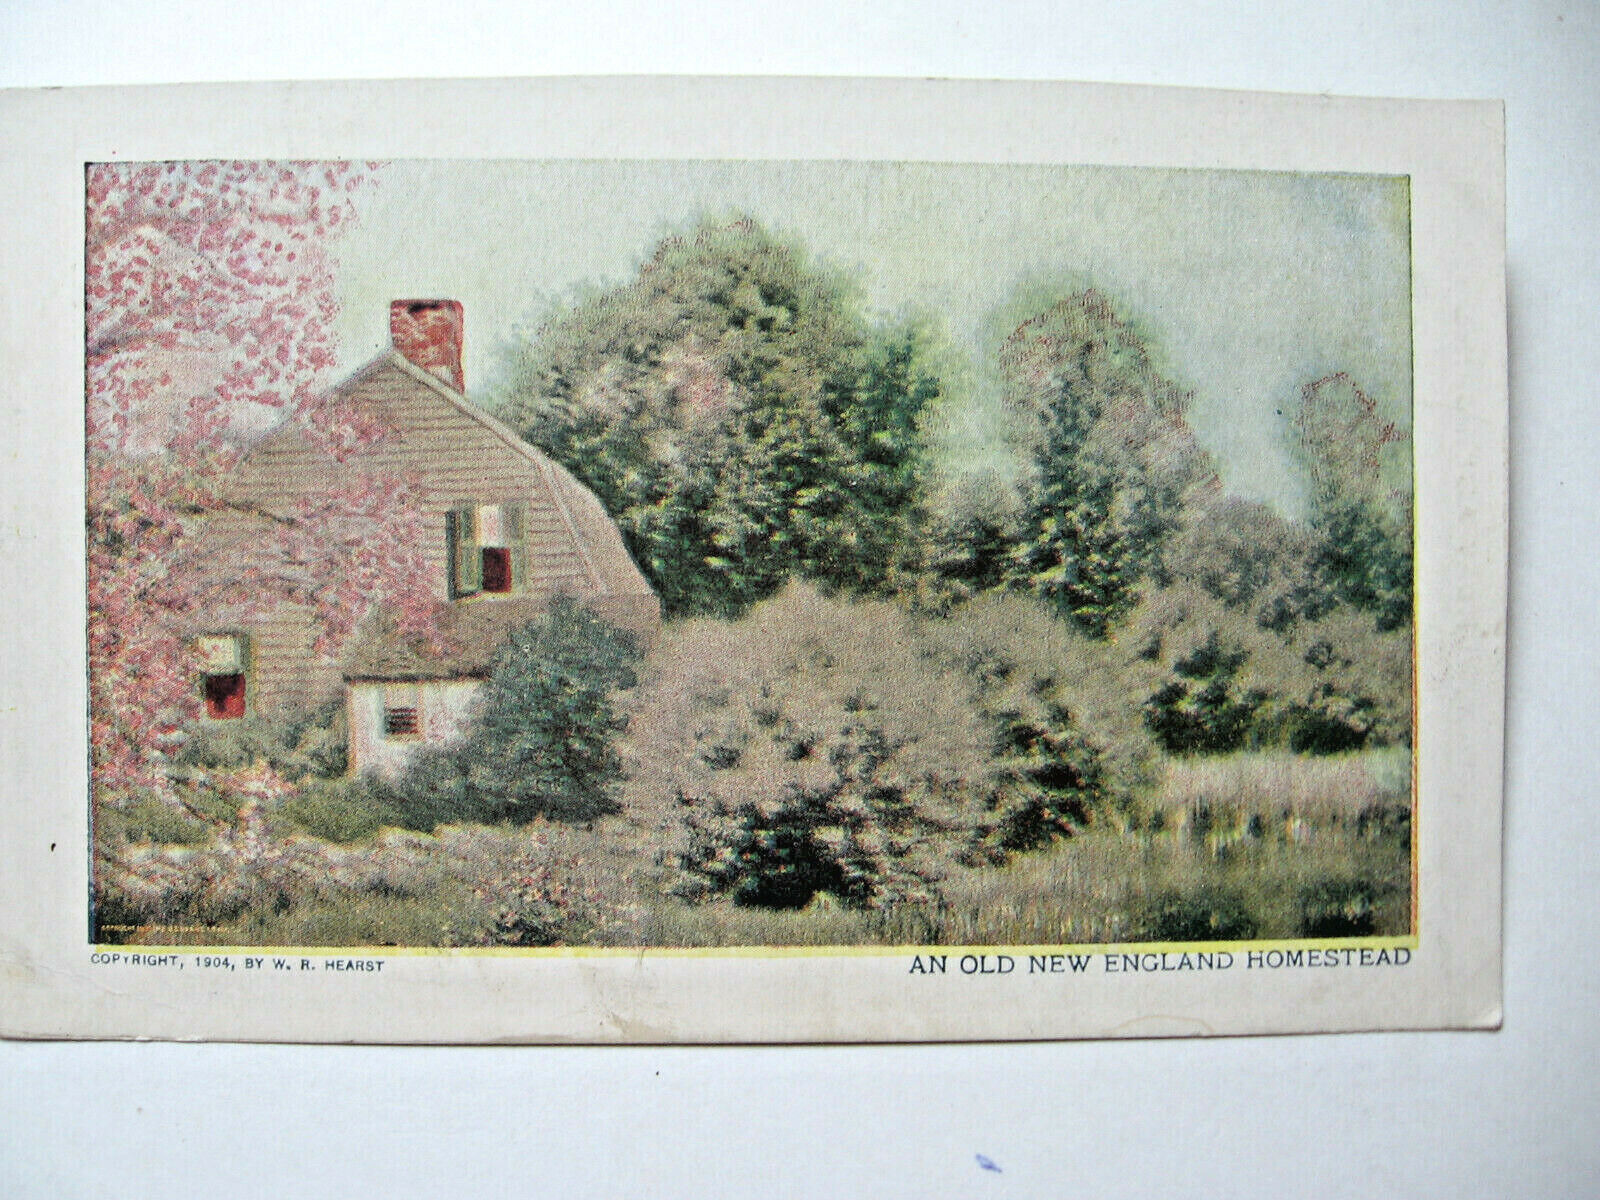 1904 Old Homestead Postcard. Copyright W.R. Hearst. Congress Authorization 1898